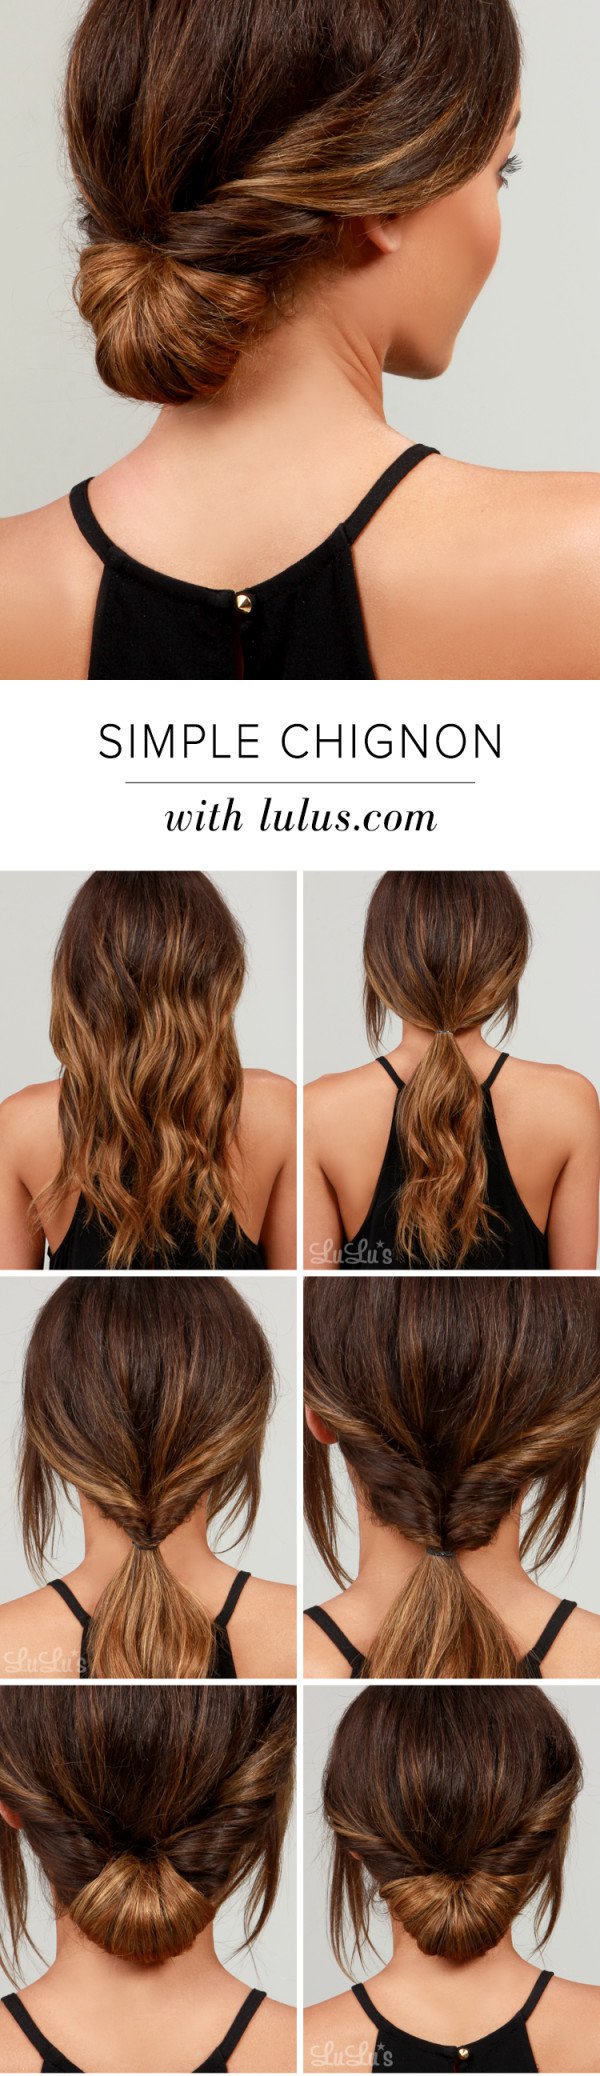 10 Of The Easiest And Fastest 3 Minutes Hairstyles For Absolutely Stunning Look